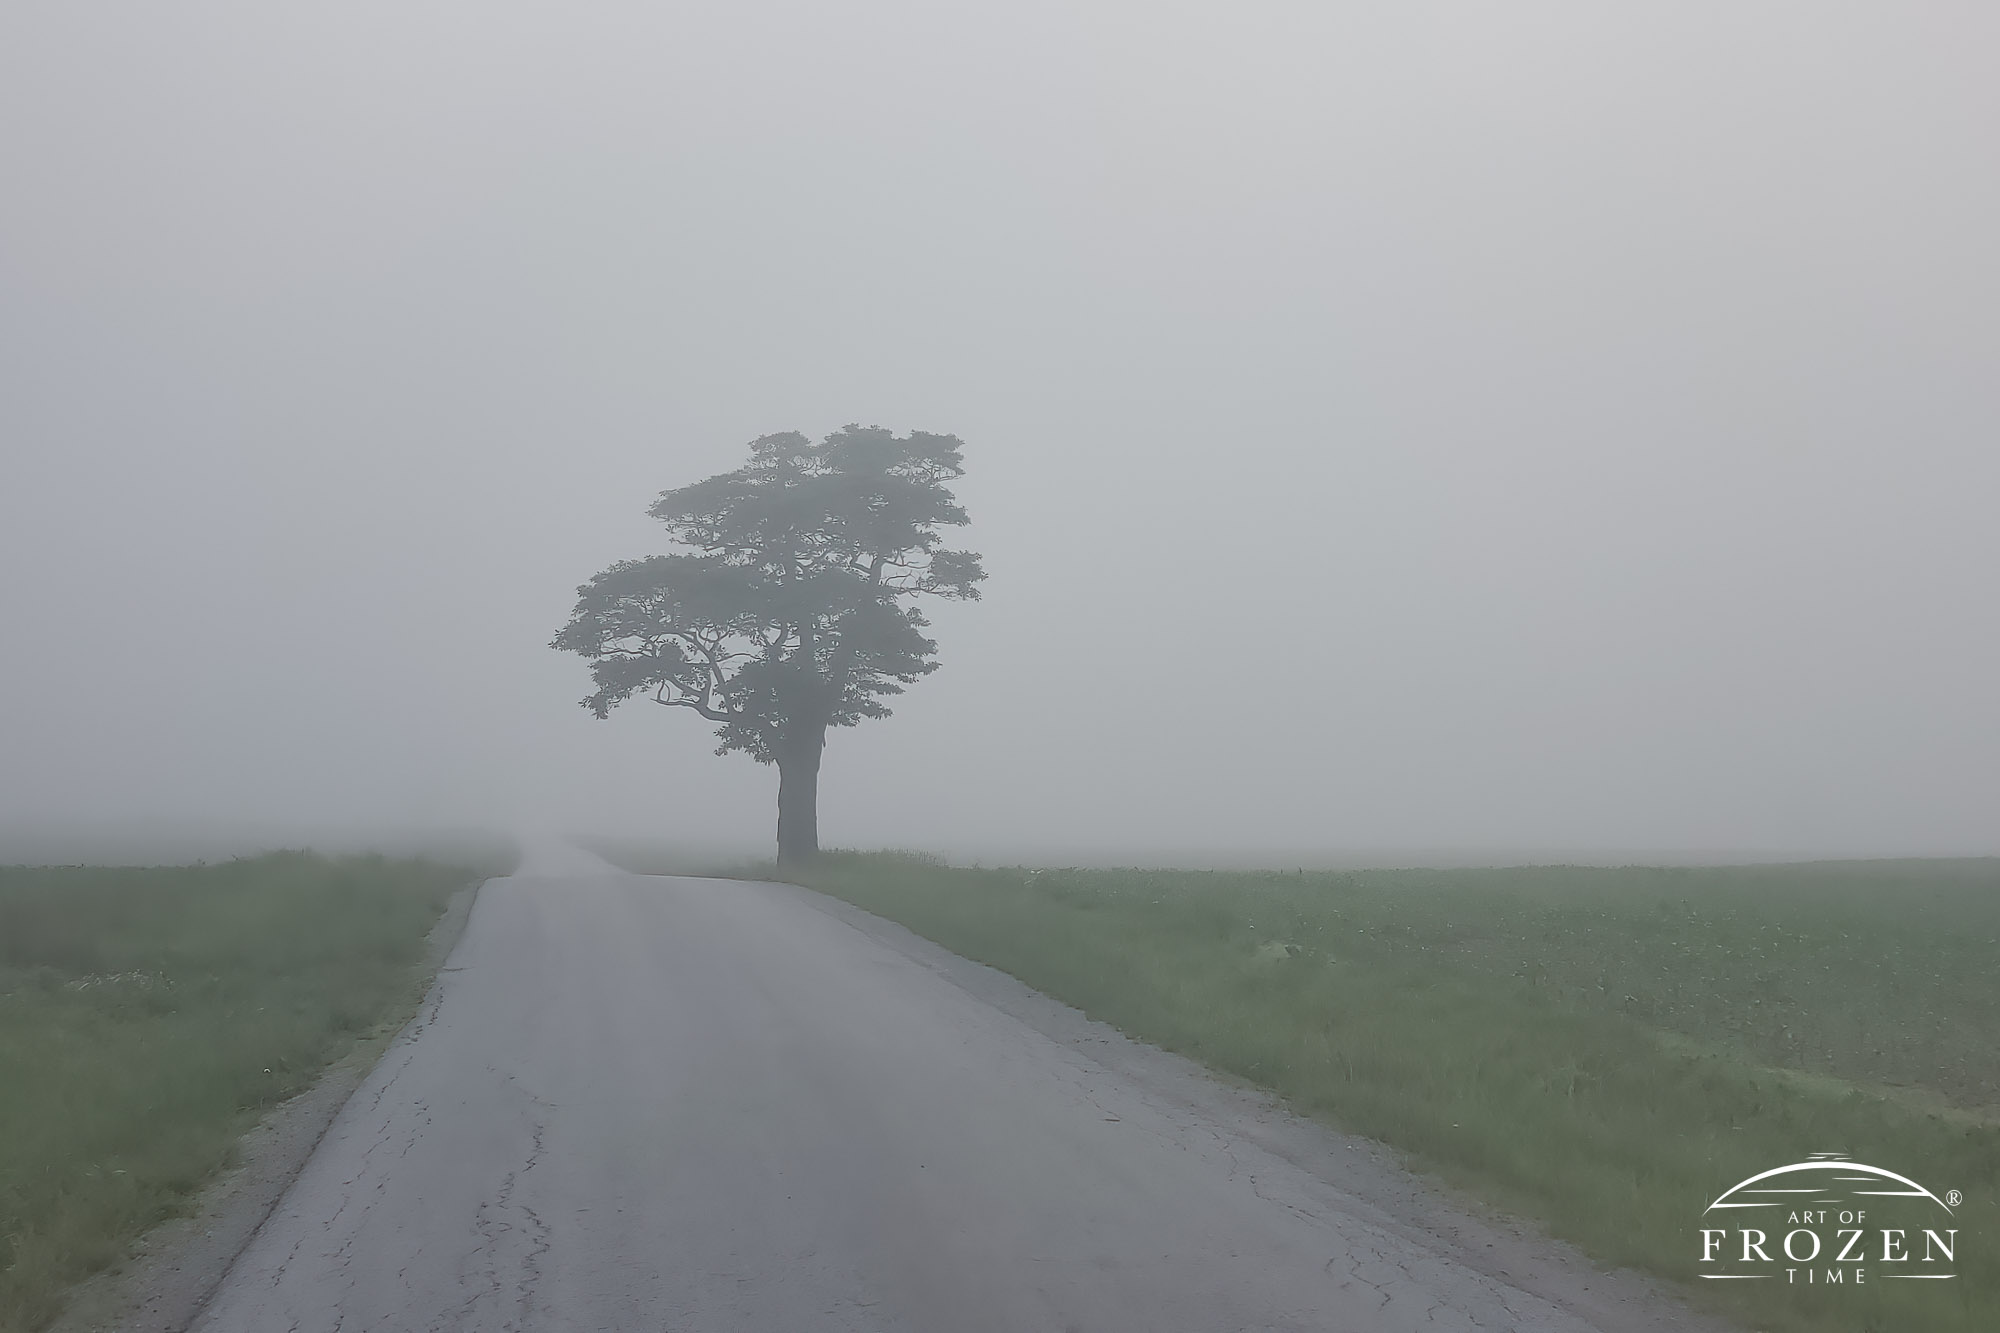 A foggy road near Cedarville, Ohio where fog suddenly appeared as the moon eclipsed the sun resulting in a cooling atmosphere